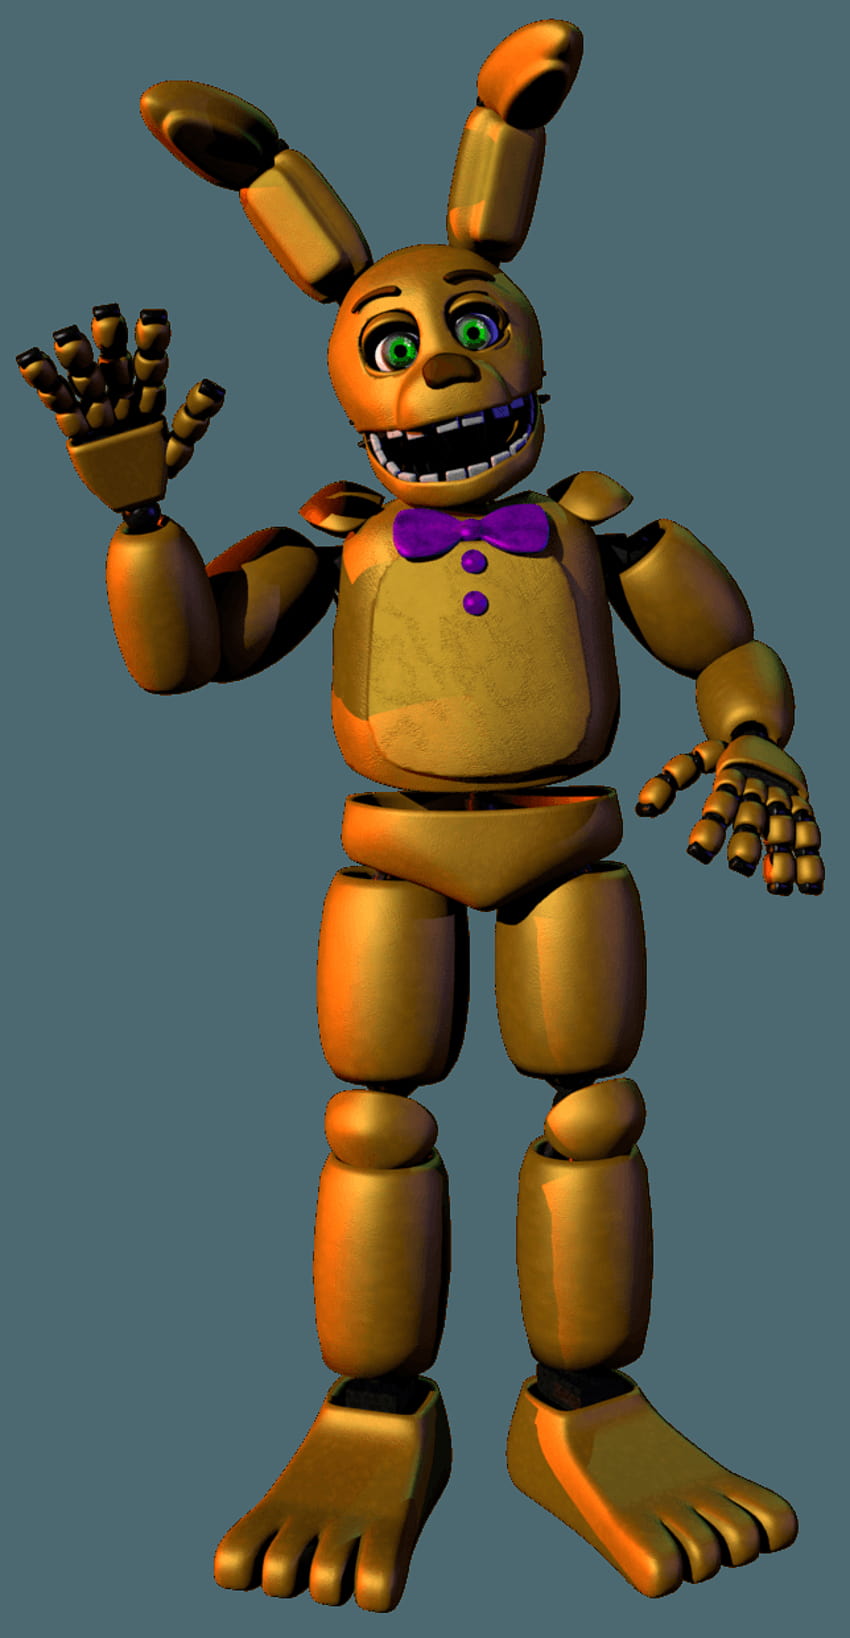 922887 Source Filmmaker springbonnie Five Nights at Freddys  Rare  Gallery HD Wallpapers